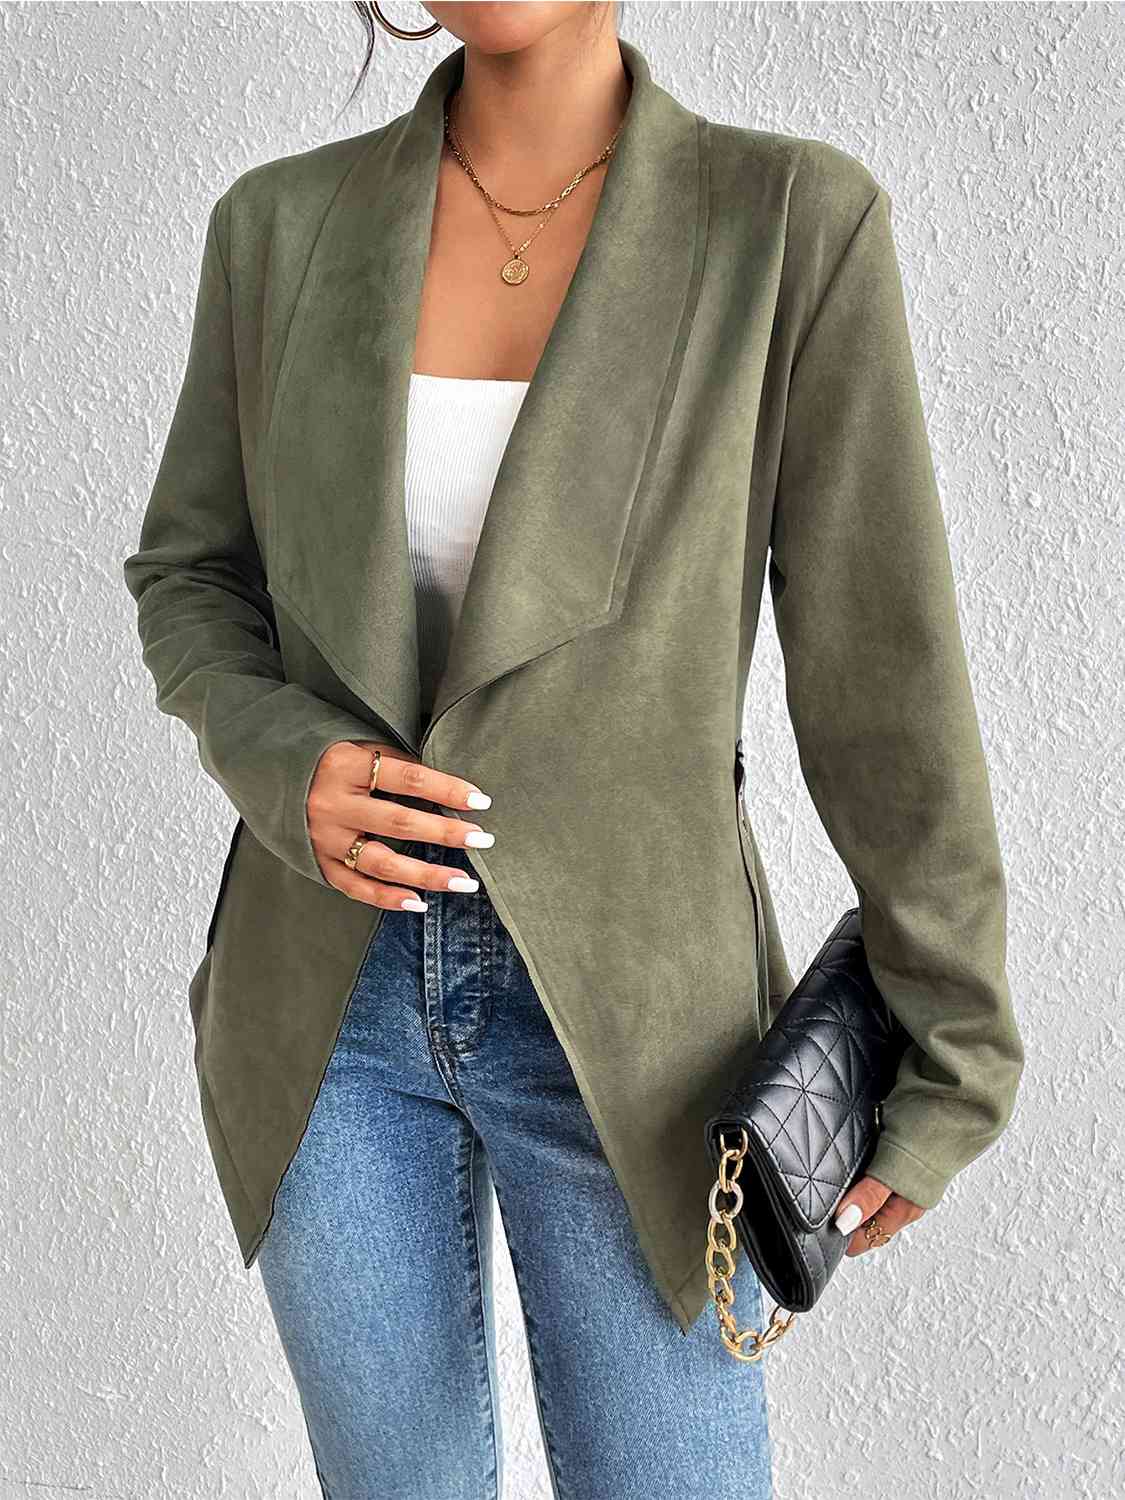 Statement Collar Long Sleeve Jacket Print on any thing USA/STOD clothes